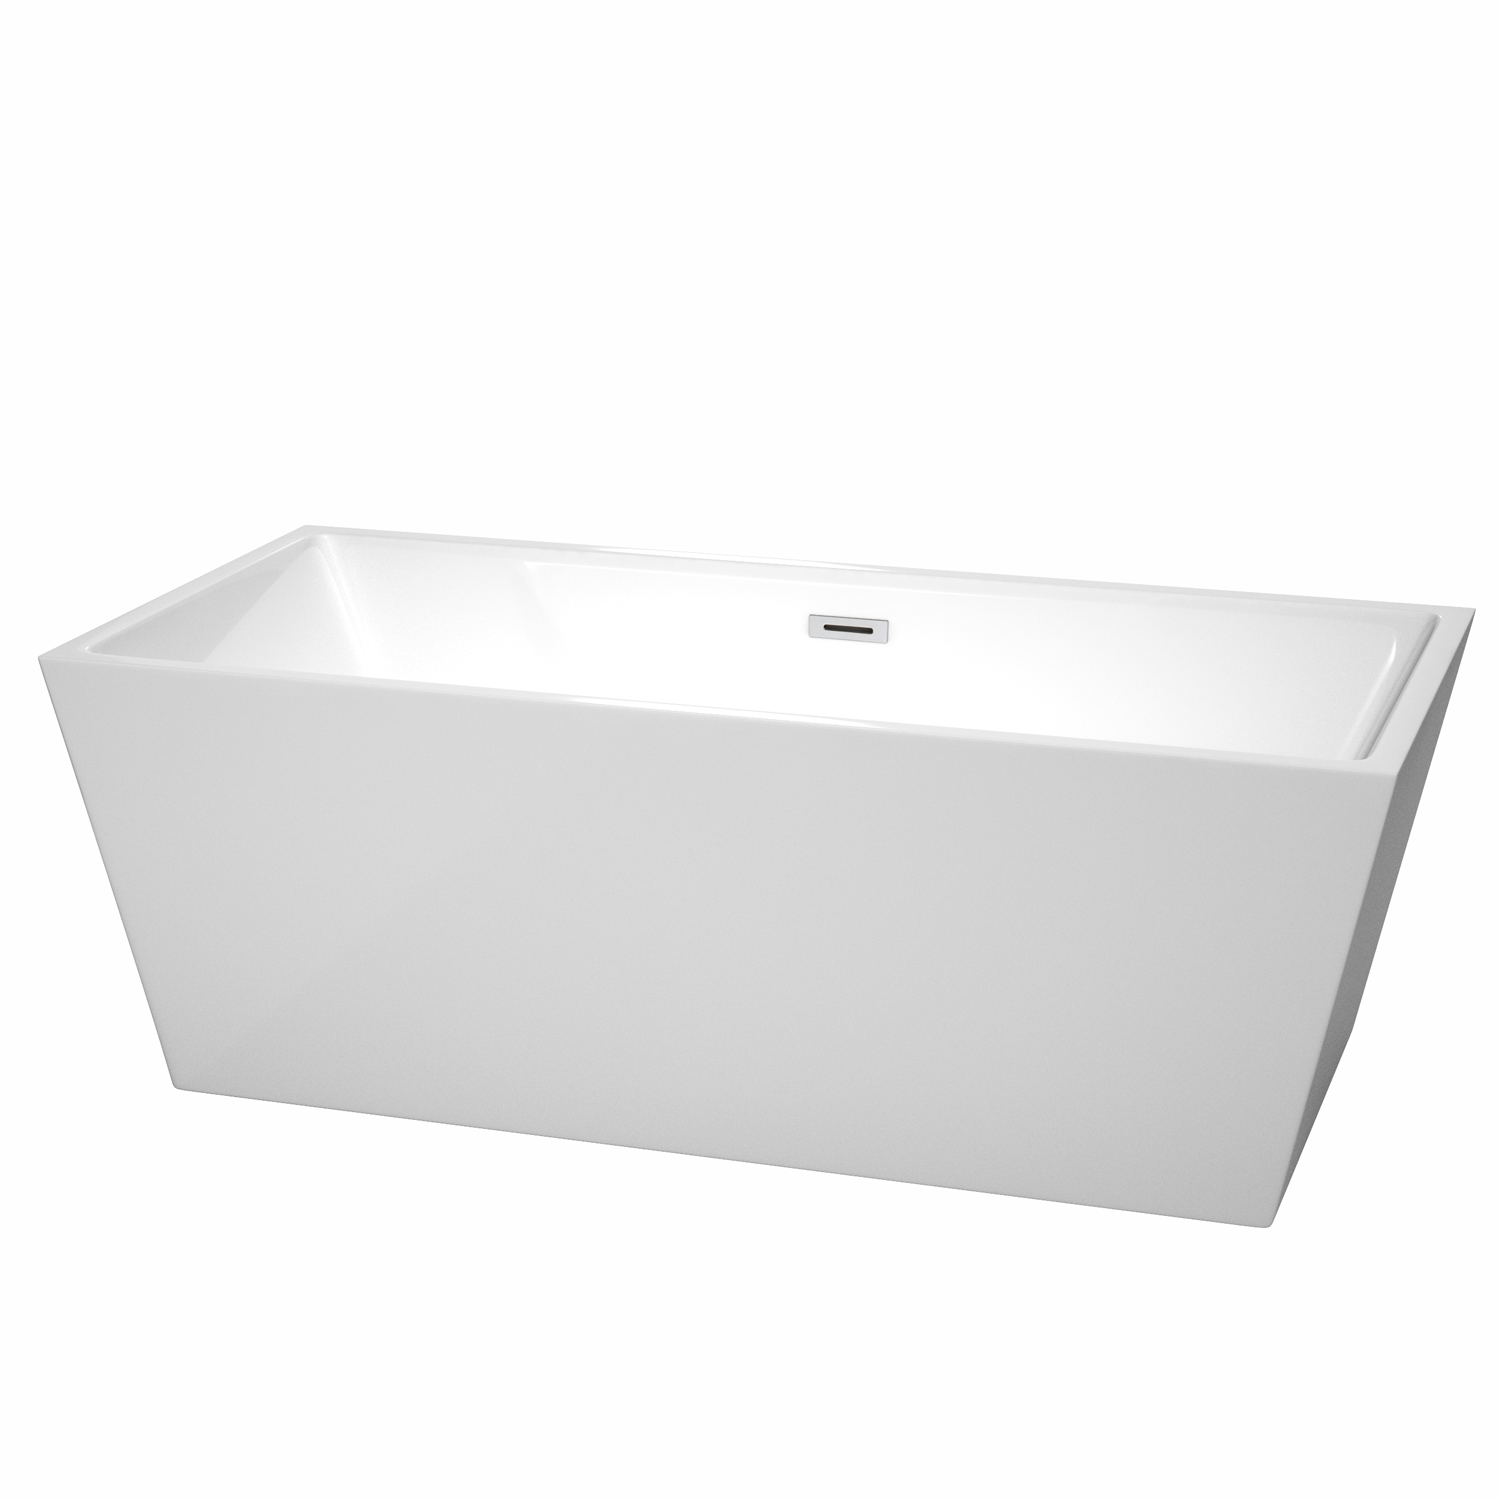 67" Freestanding Bathtub in White with Polished Chrome Drain and Overflow Trim w/ Faucet Options